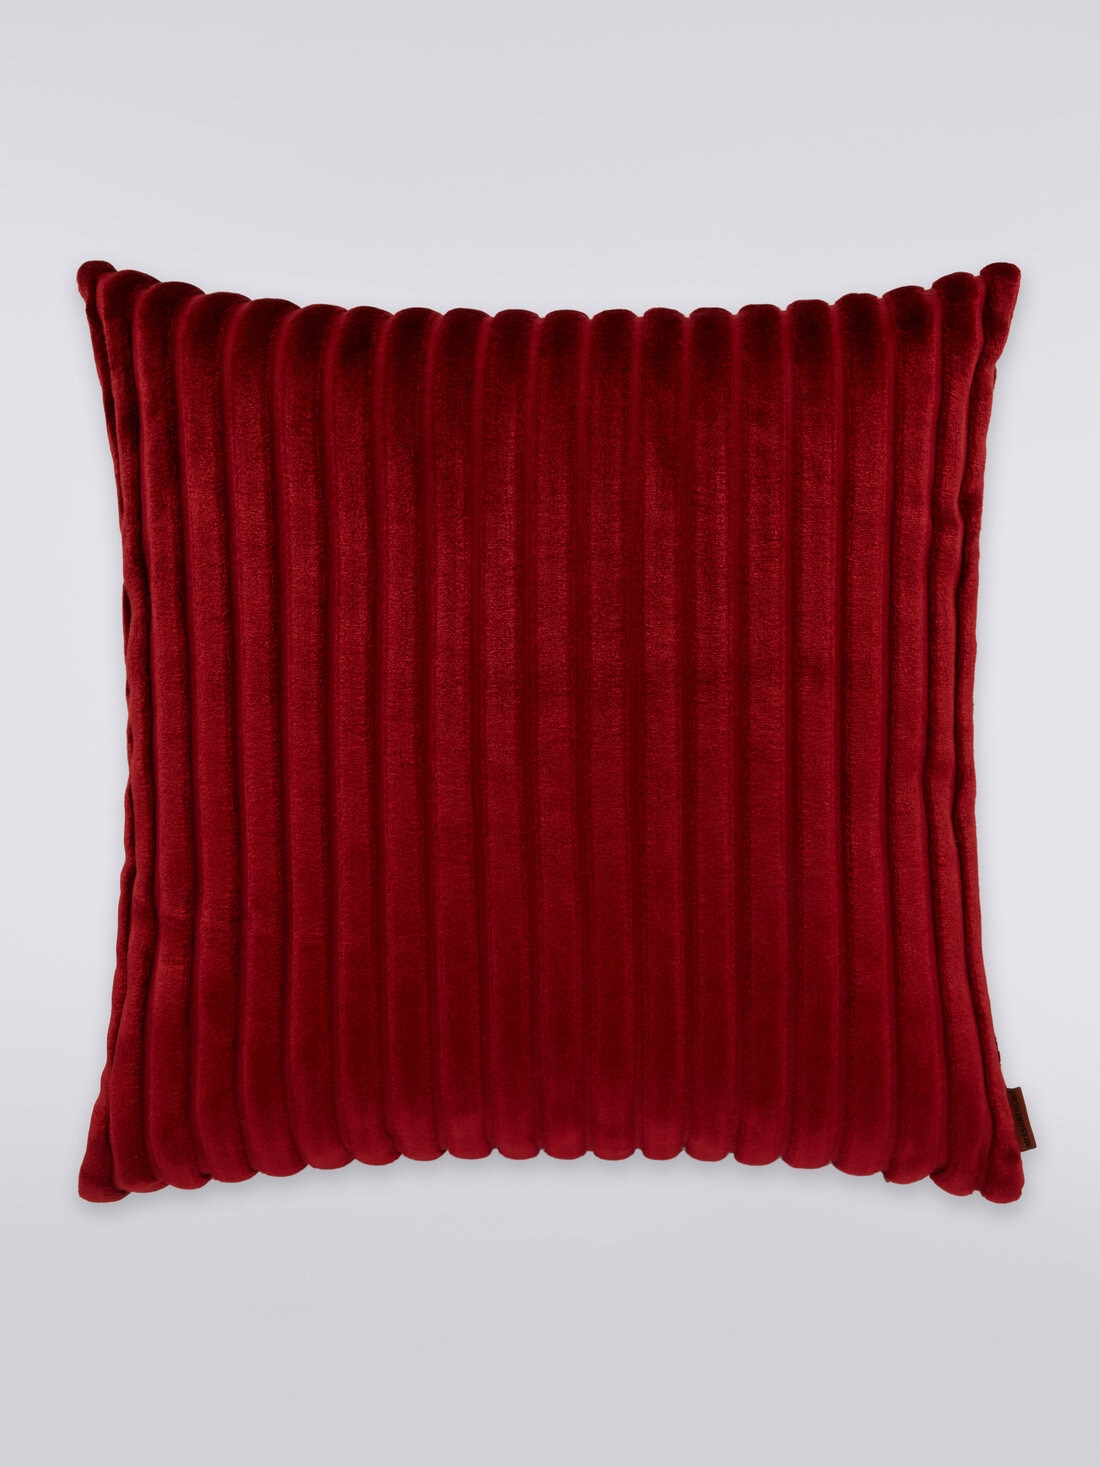 Coomba Cushion 40X40, Red  - 8033050653744 - 0